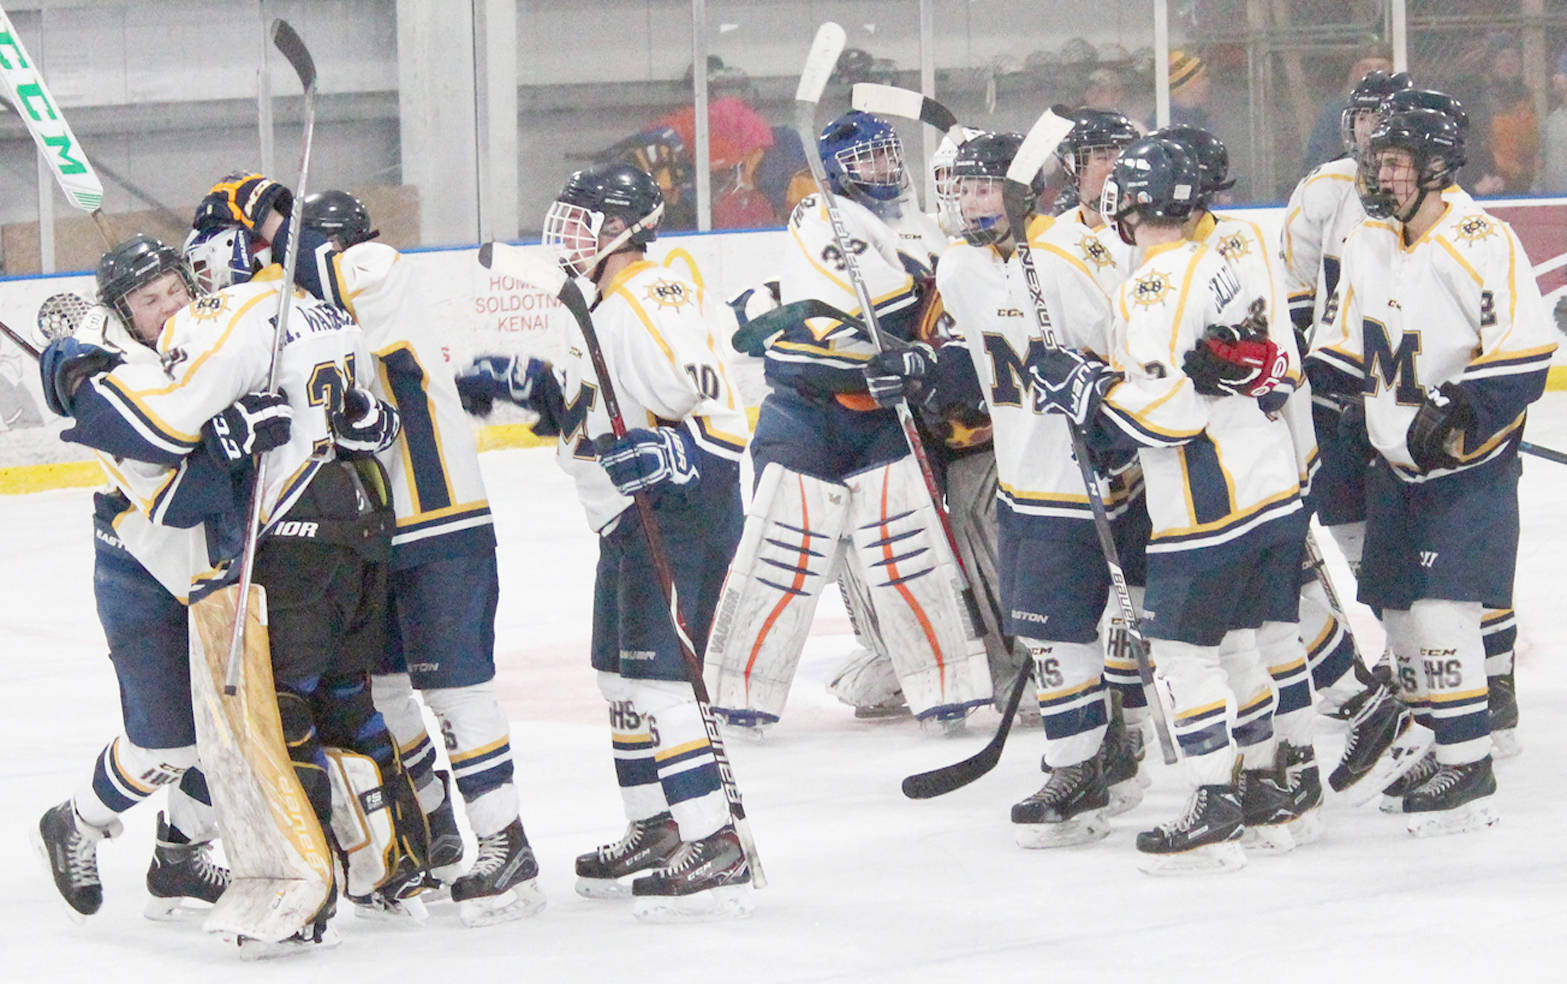 Homer High School’s hockey team celebrates its 2-1 win against Colony High School on Friday, Dec. 1, 2017 at Kevin Bell Arena in Homer. (Photo by Megan Pacer/Homer News)